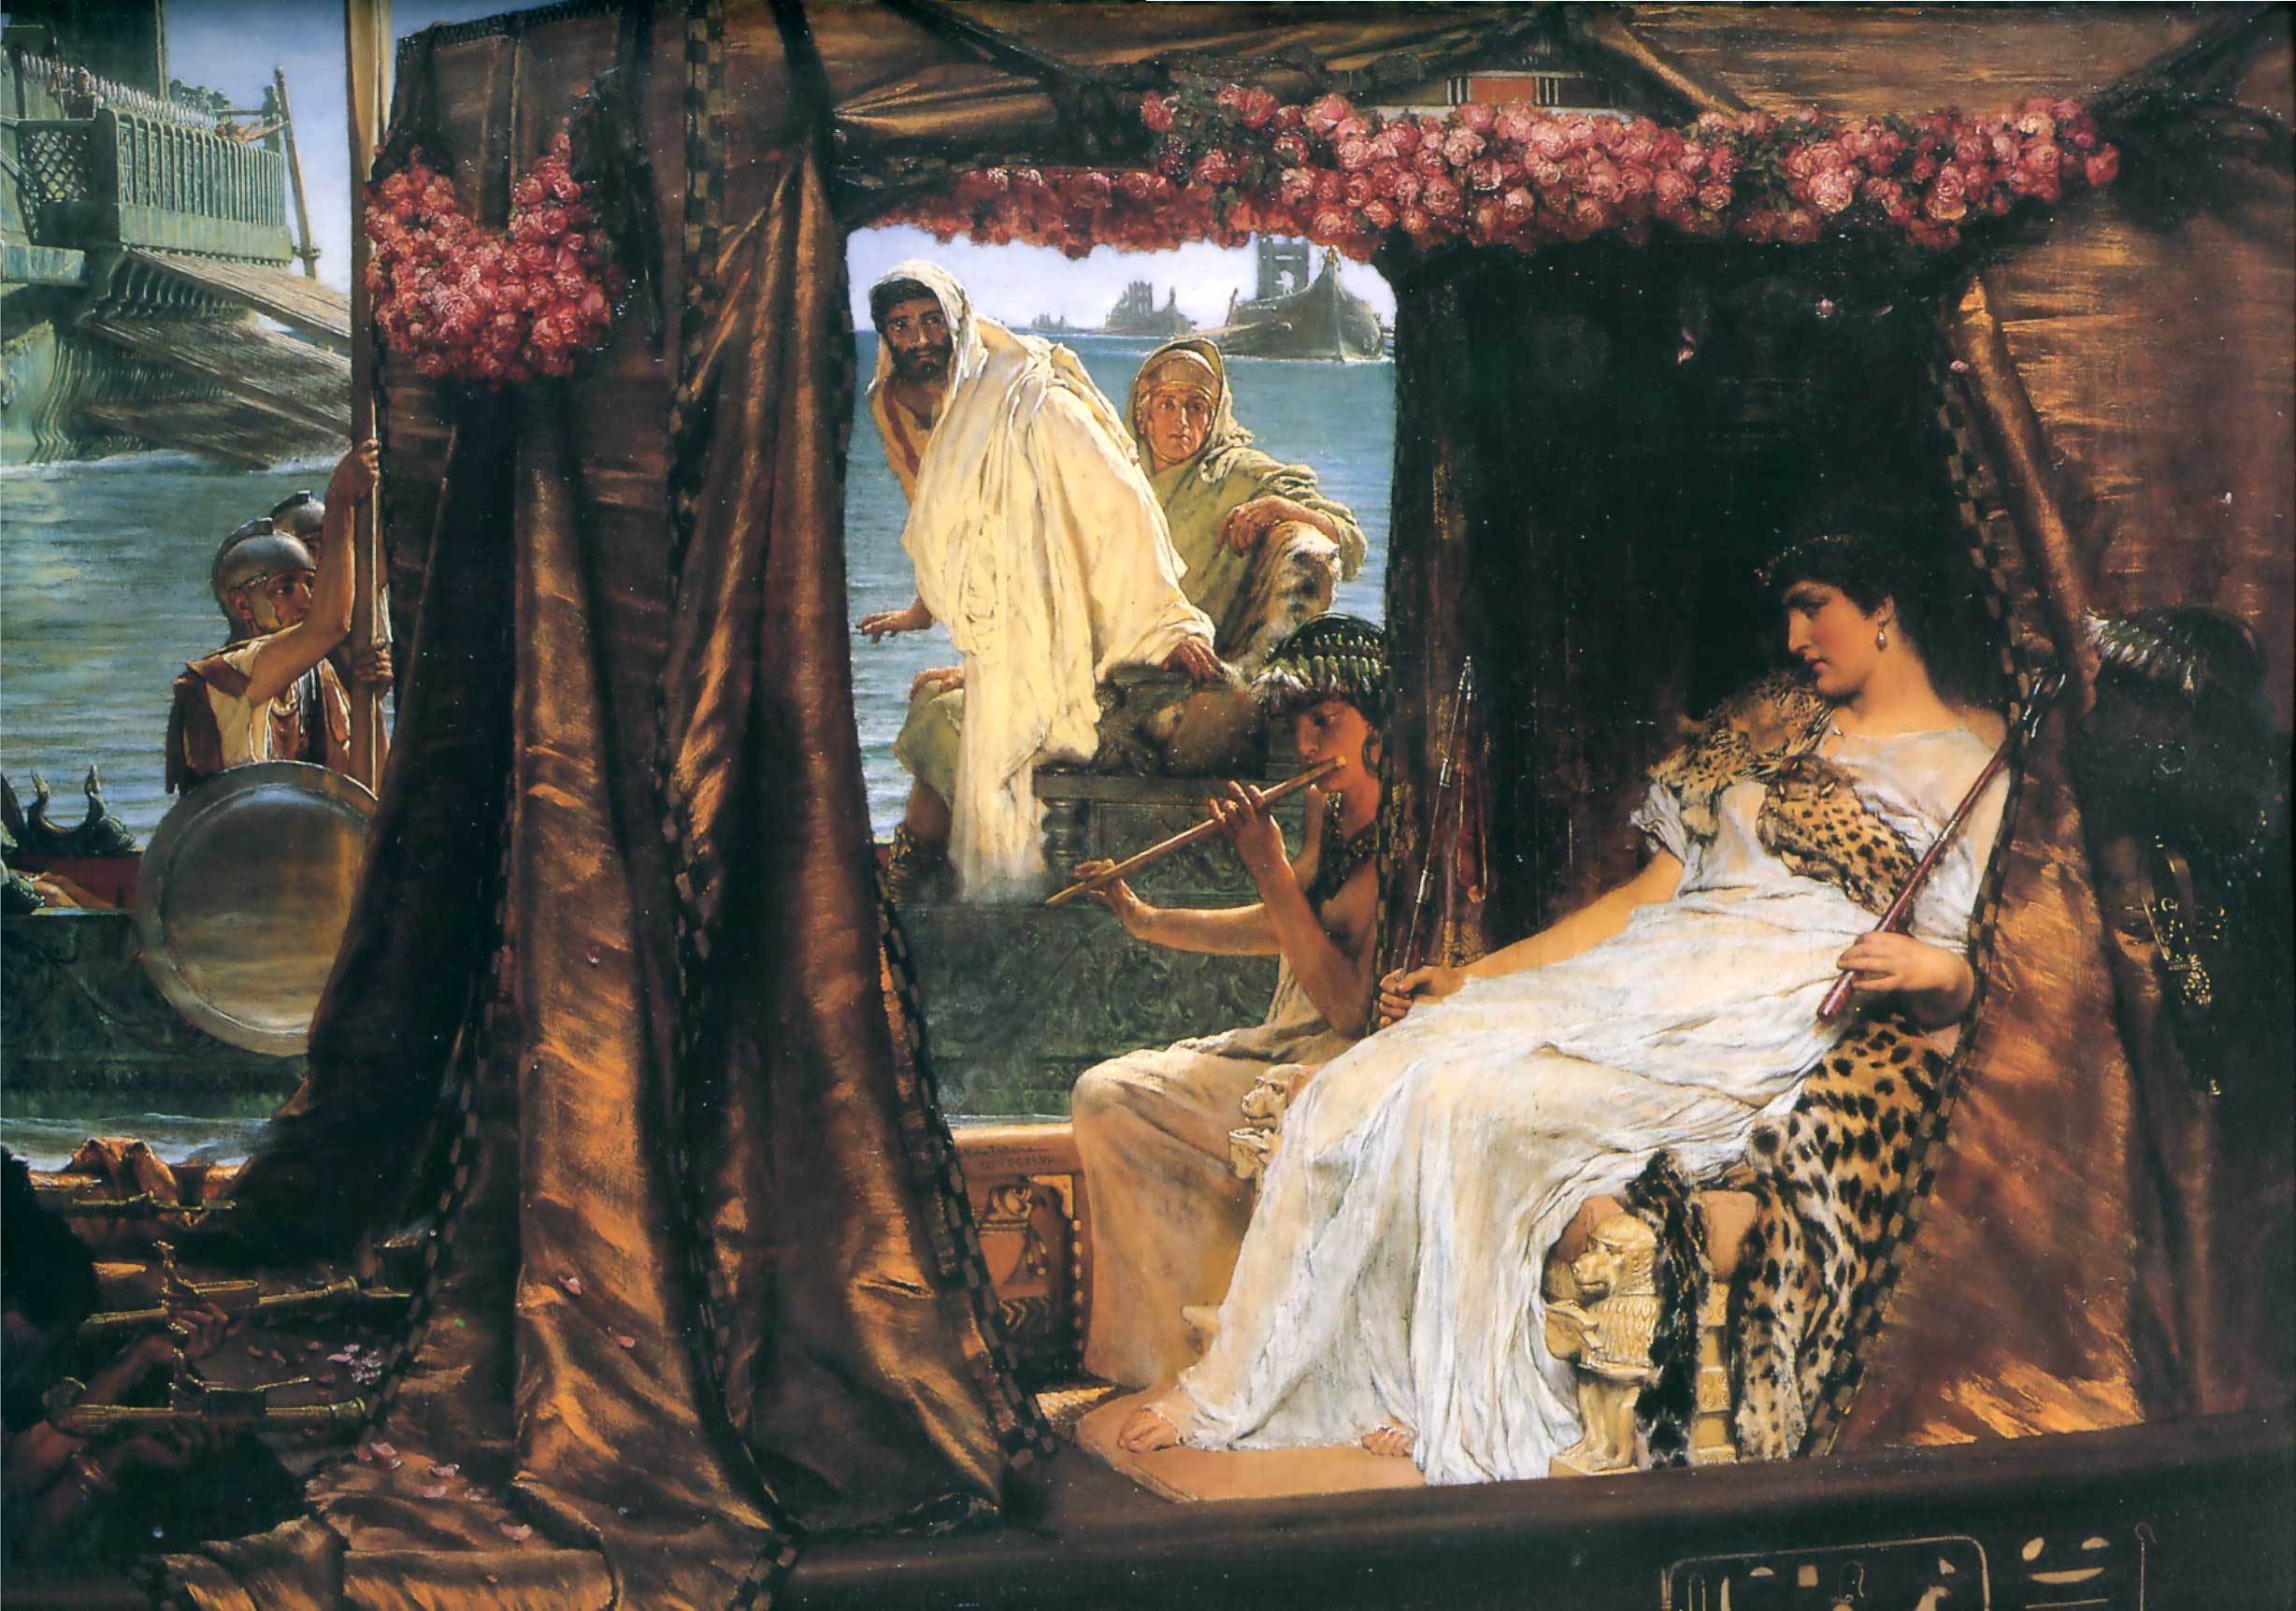 The Meeting of Antony and Cleopatra: 41 BC by Lawrence Alma-Tadema - 1885 - 65.5 × 92 cm private collection